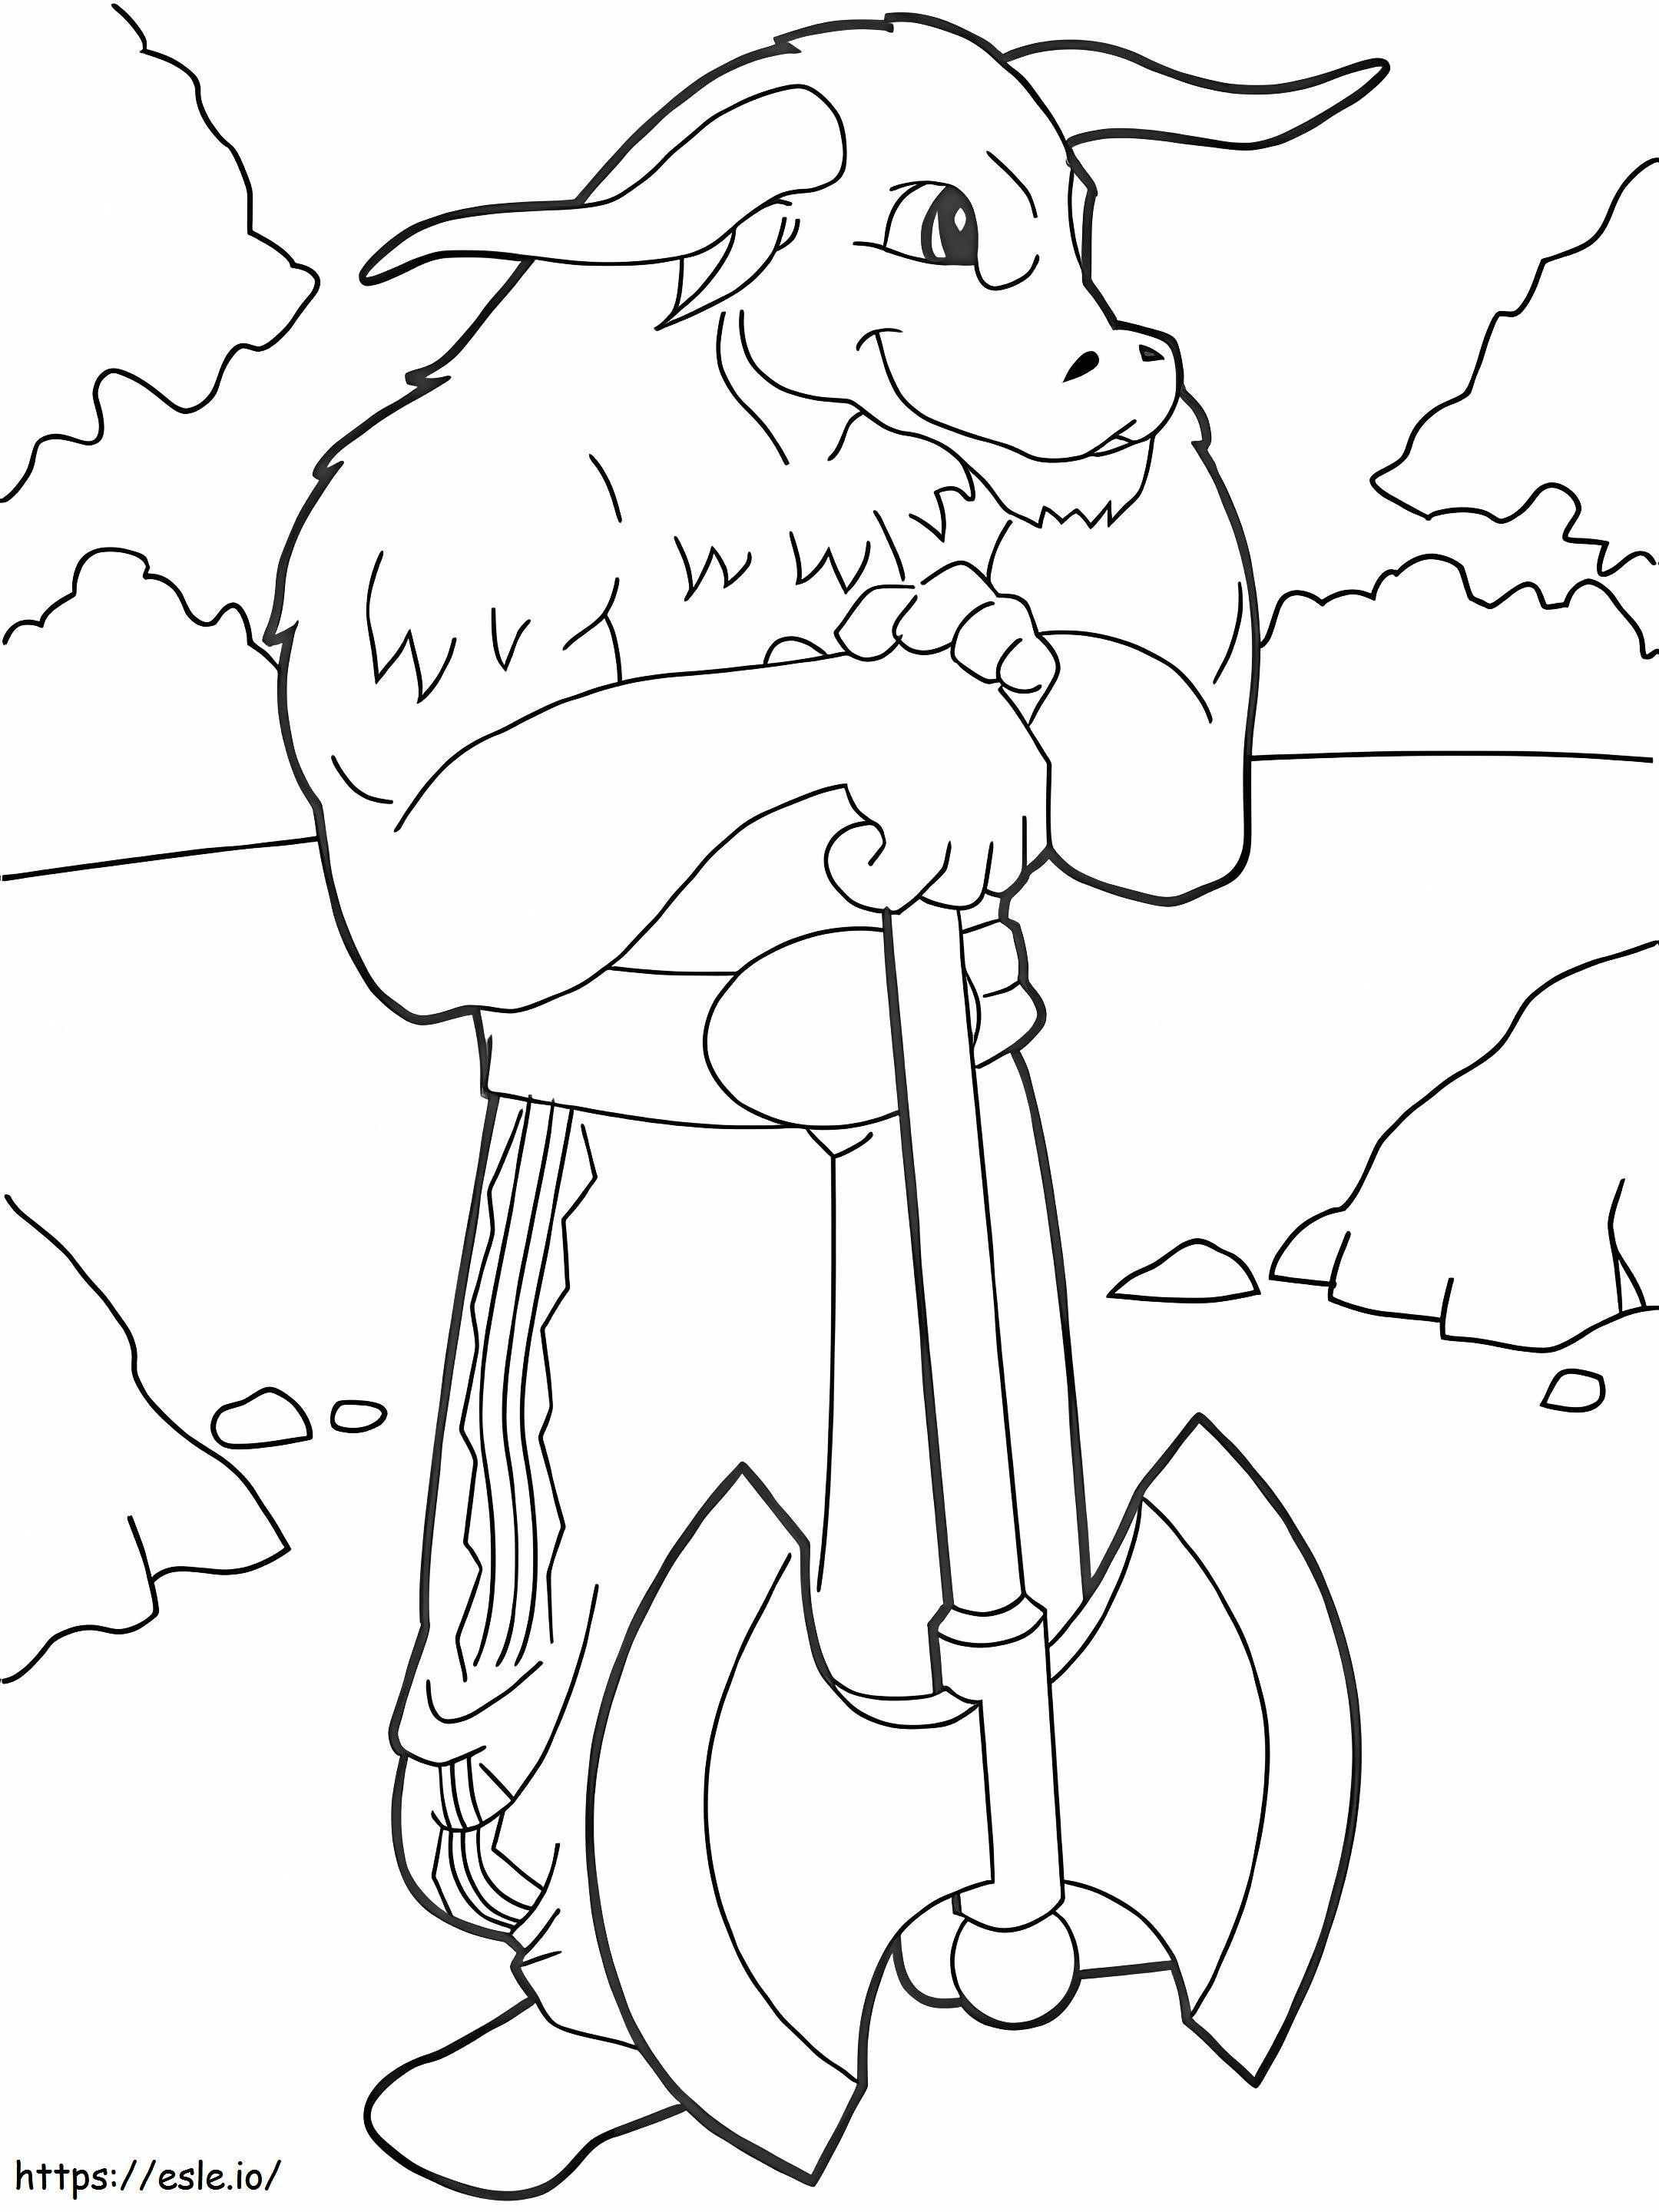 Minotaur With Axe coloring page